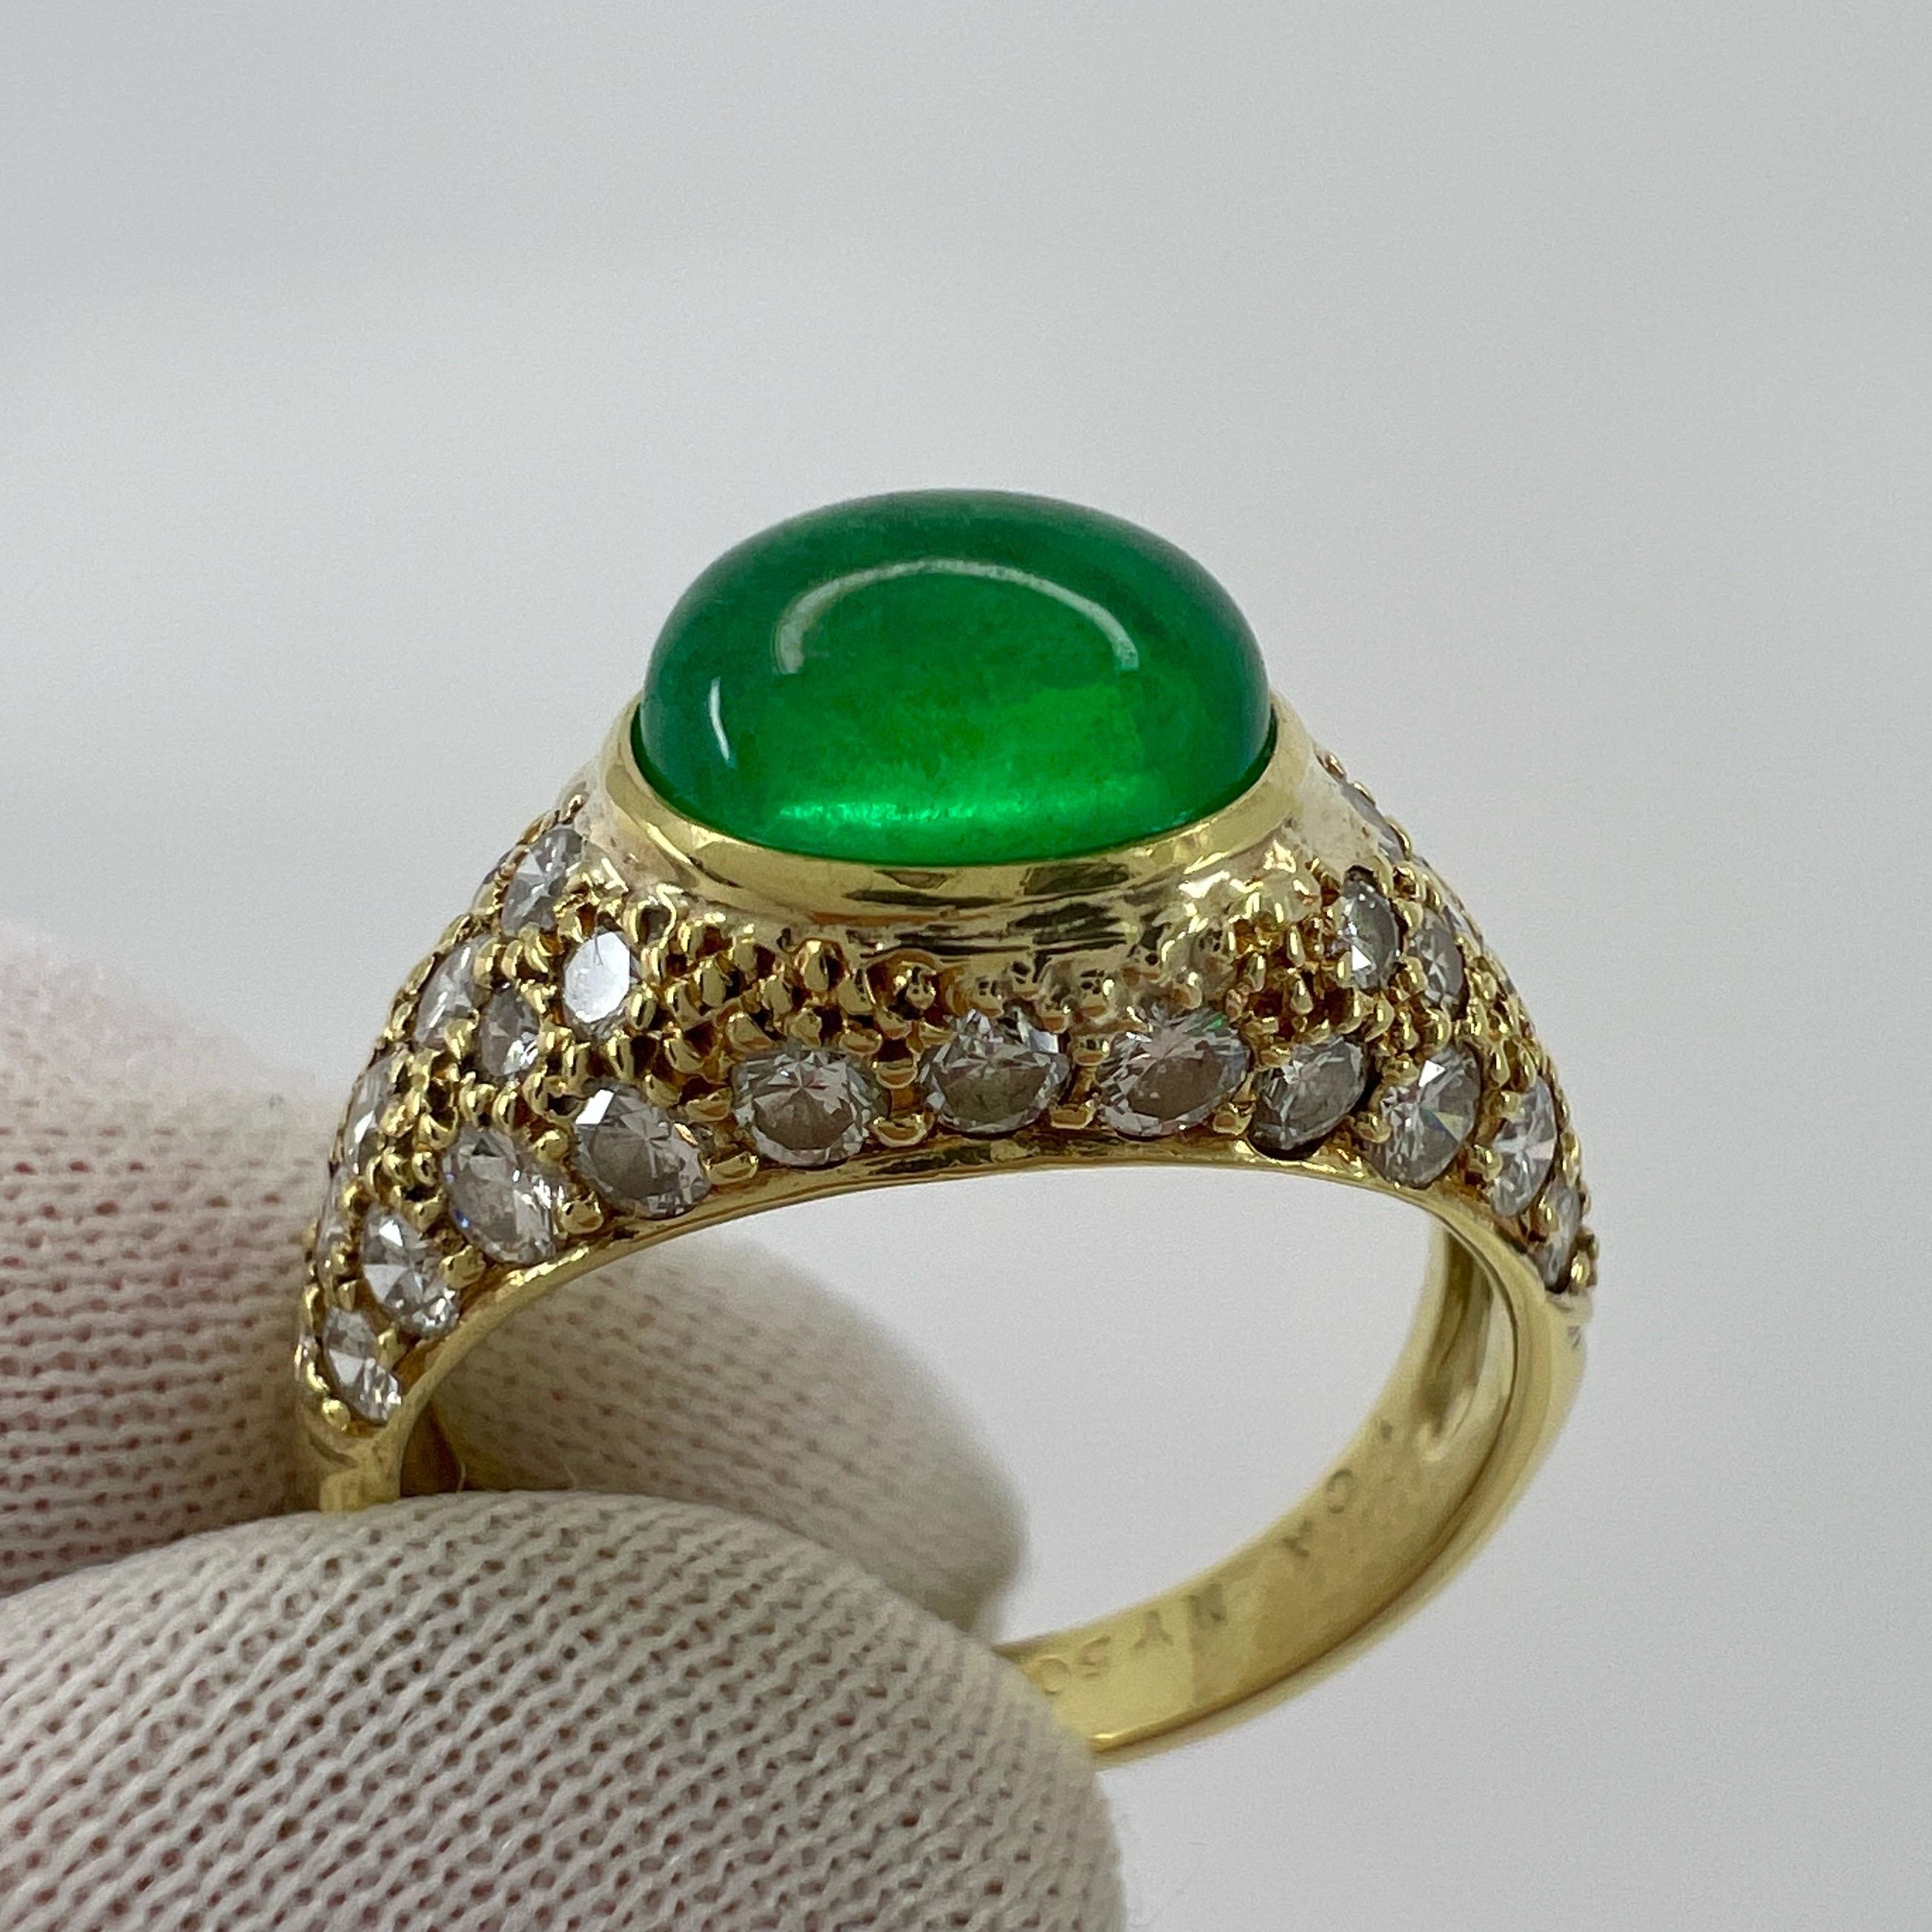 Women's or Men's Rare Vintage Van Cleef & Arpels 2 Carat Emerald And Diamond Cocktail Dome Ring For Sale